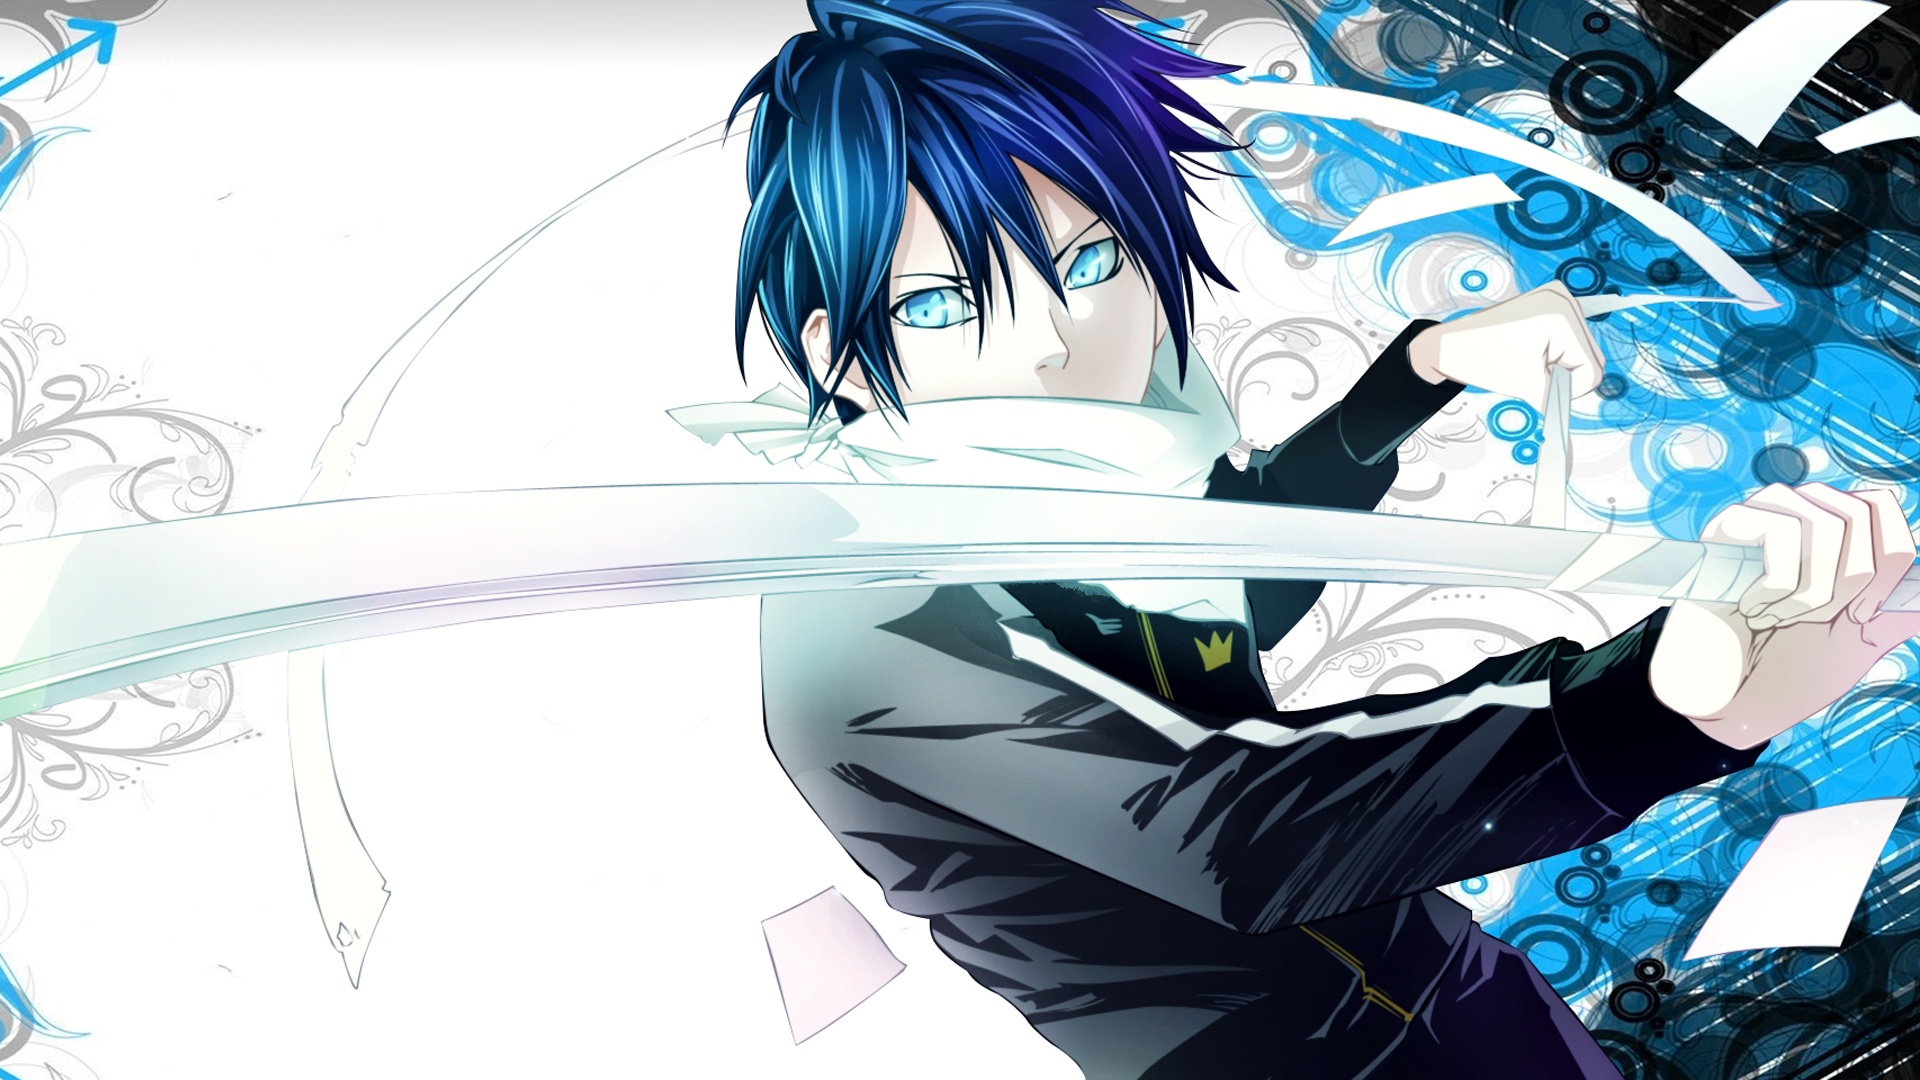 Blue-haired Neko Girl from "Noragami" Anime - wide 7